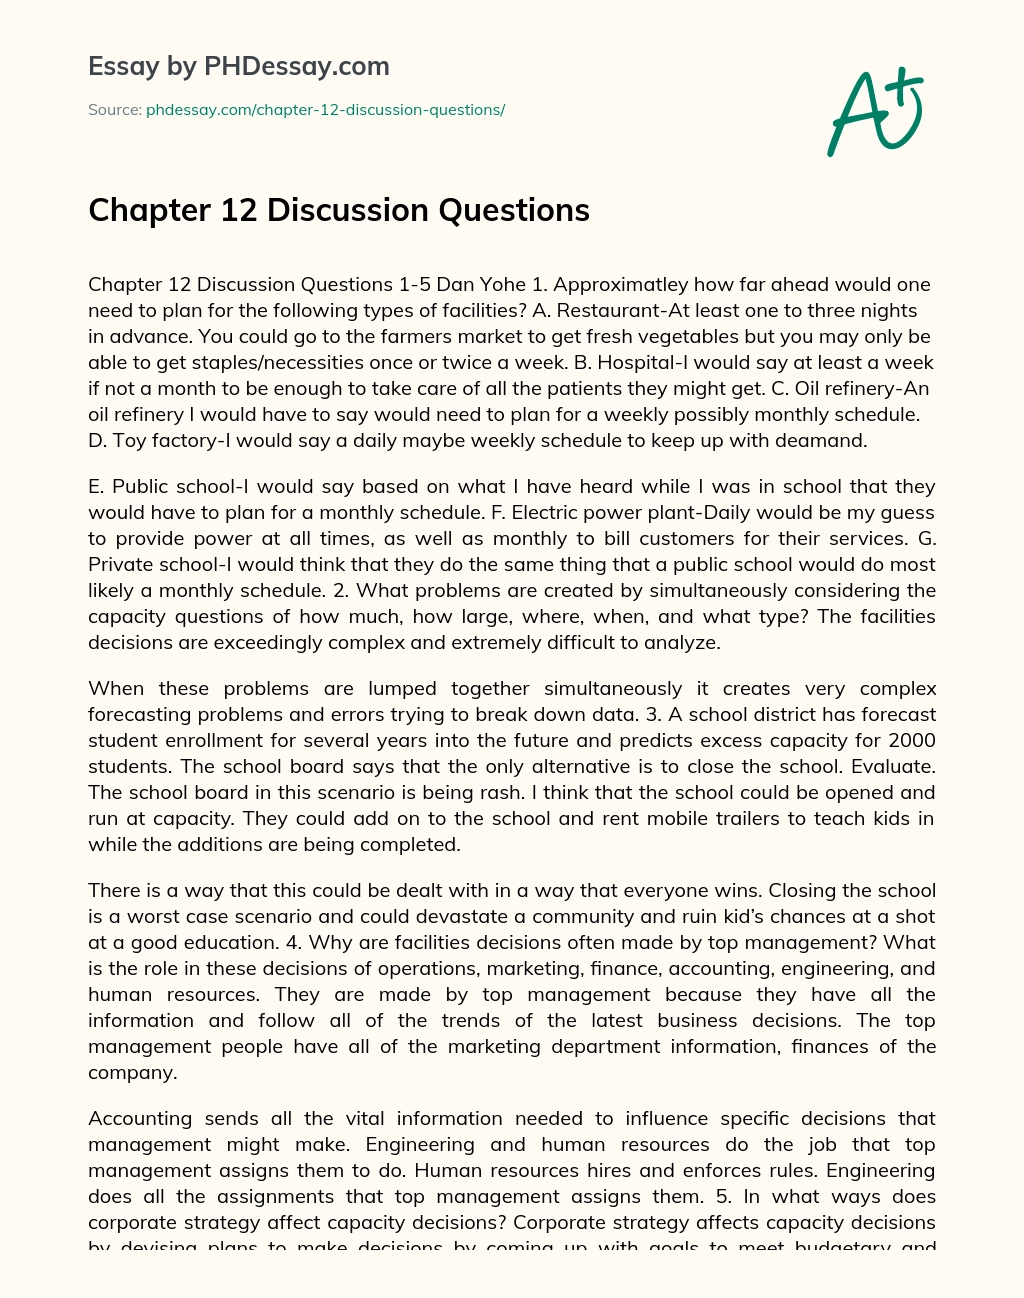 Chapter 12 Discussion Questions essay